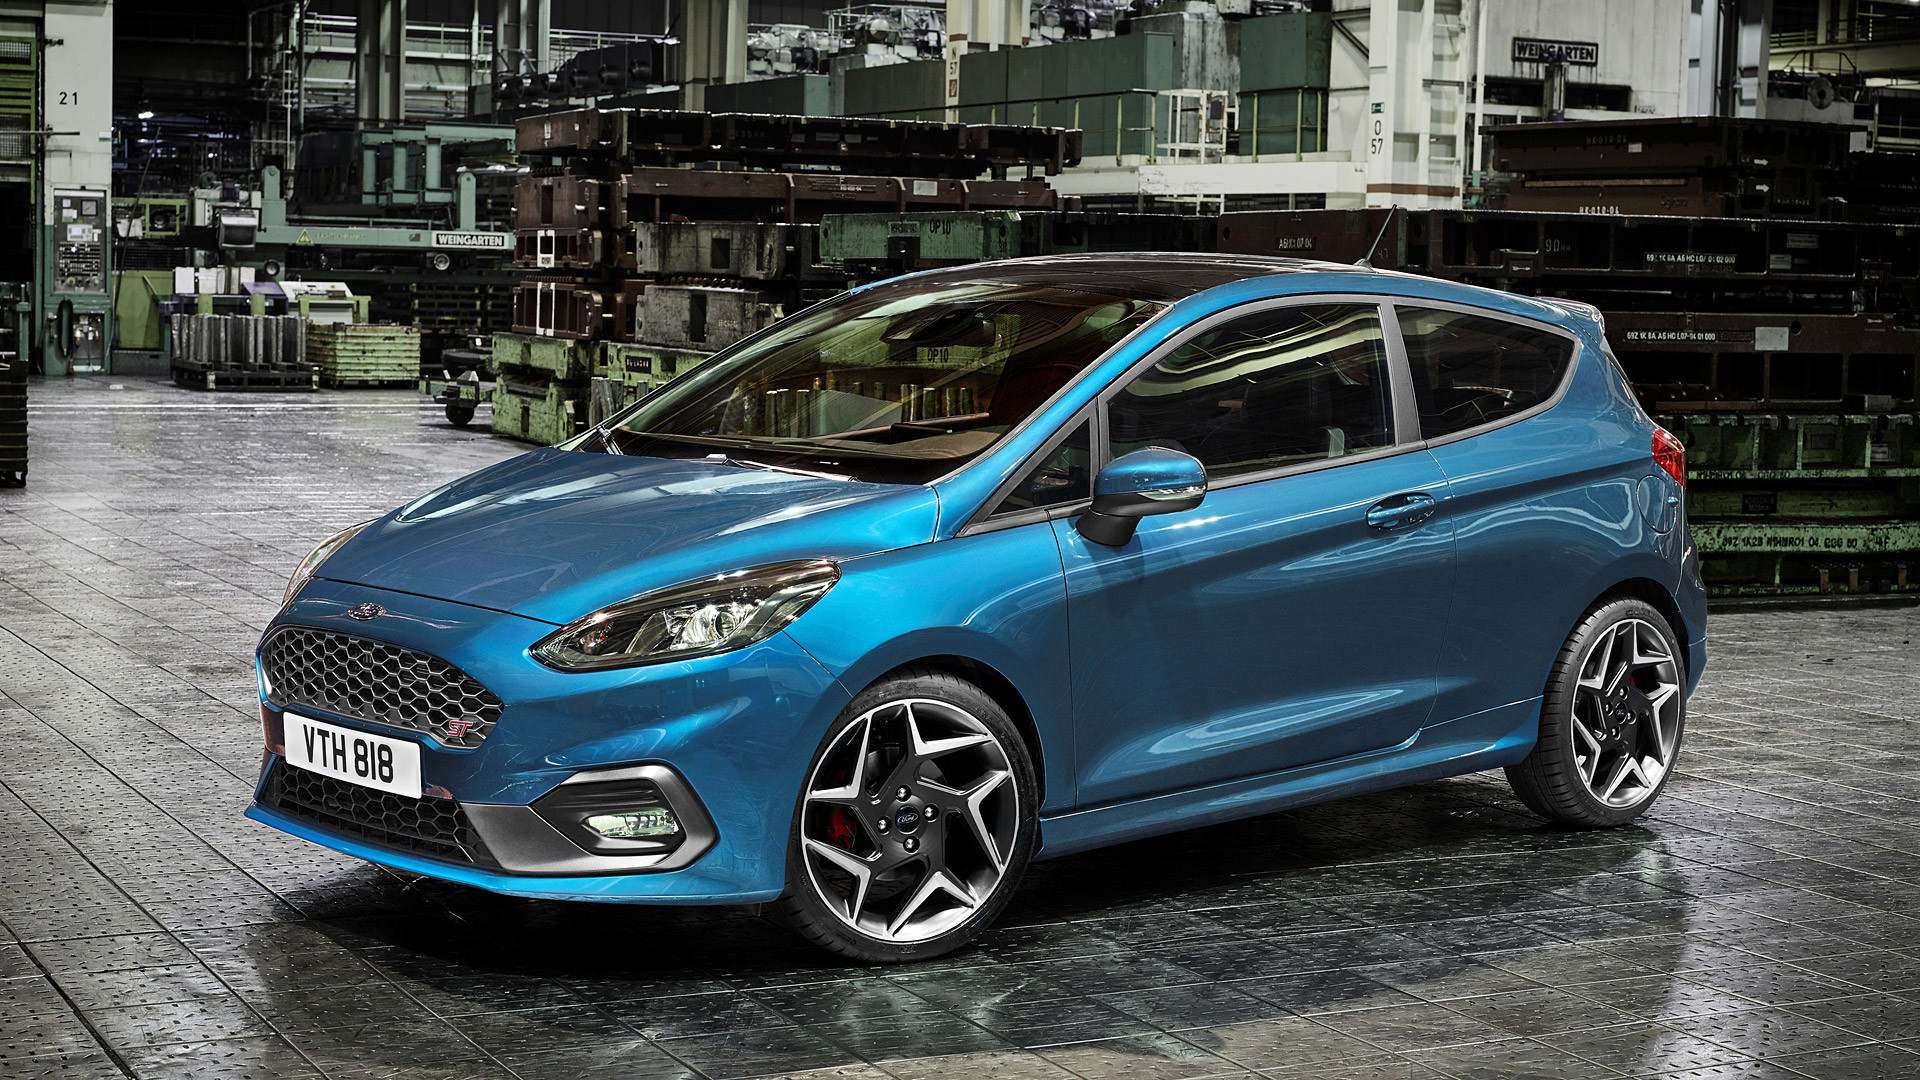 2018 Ford Fiesta St Picture 1920x1080